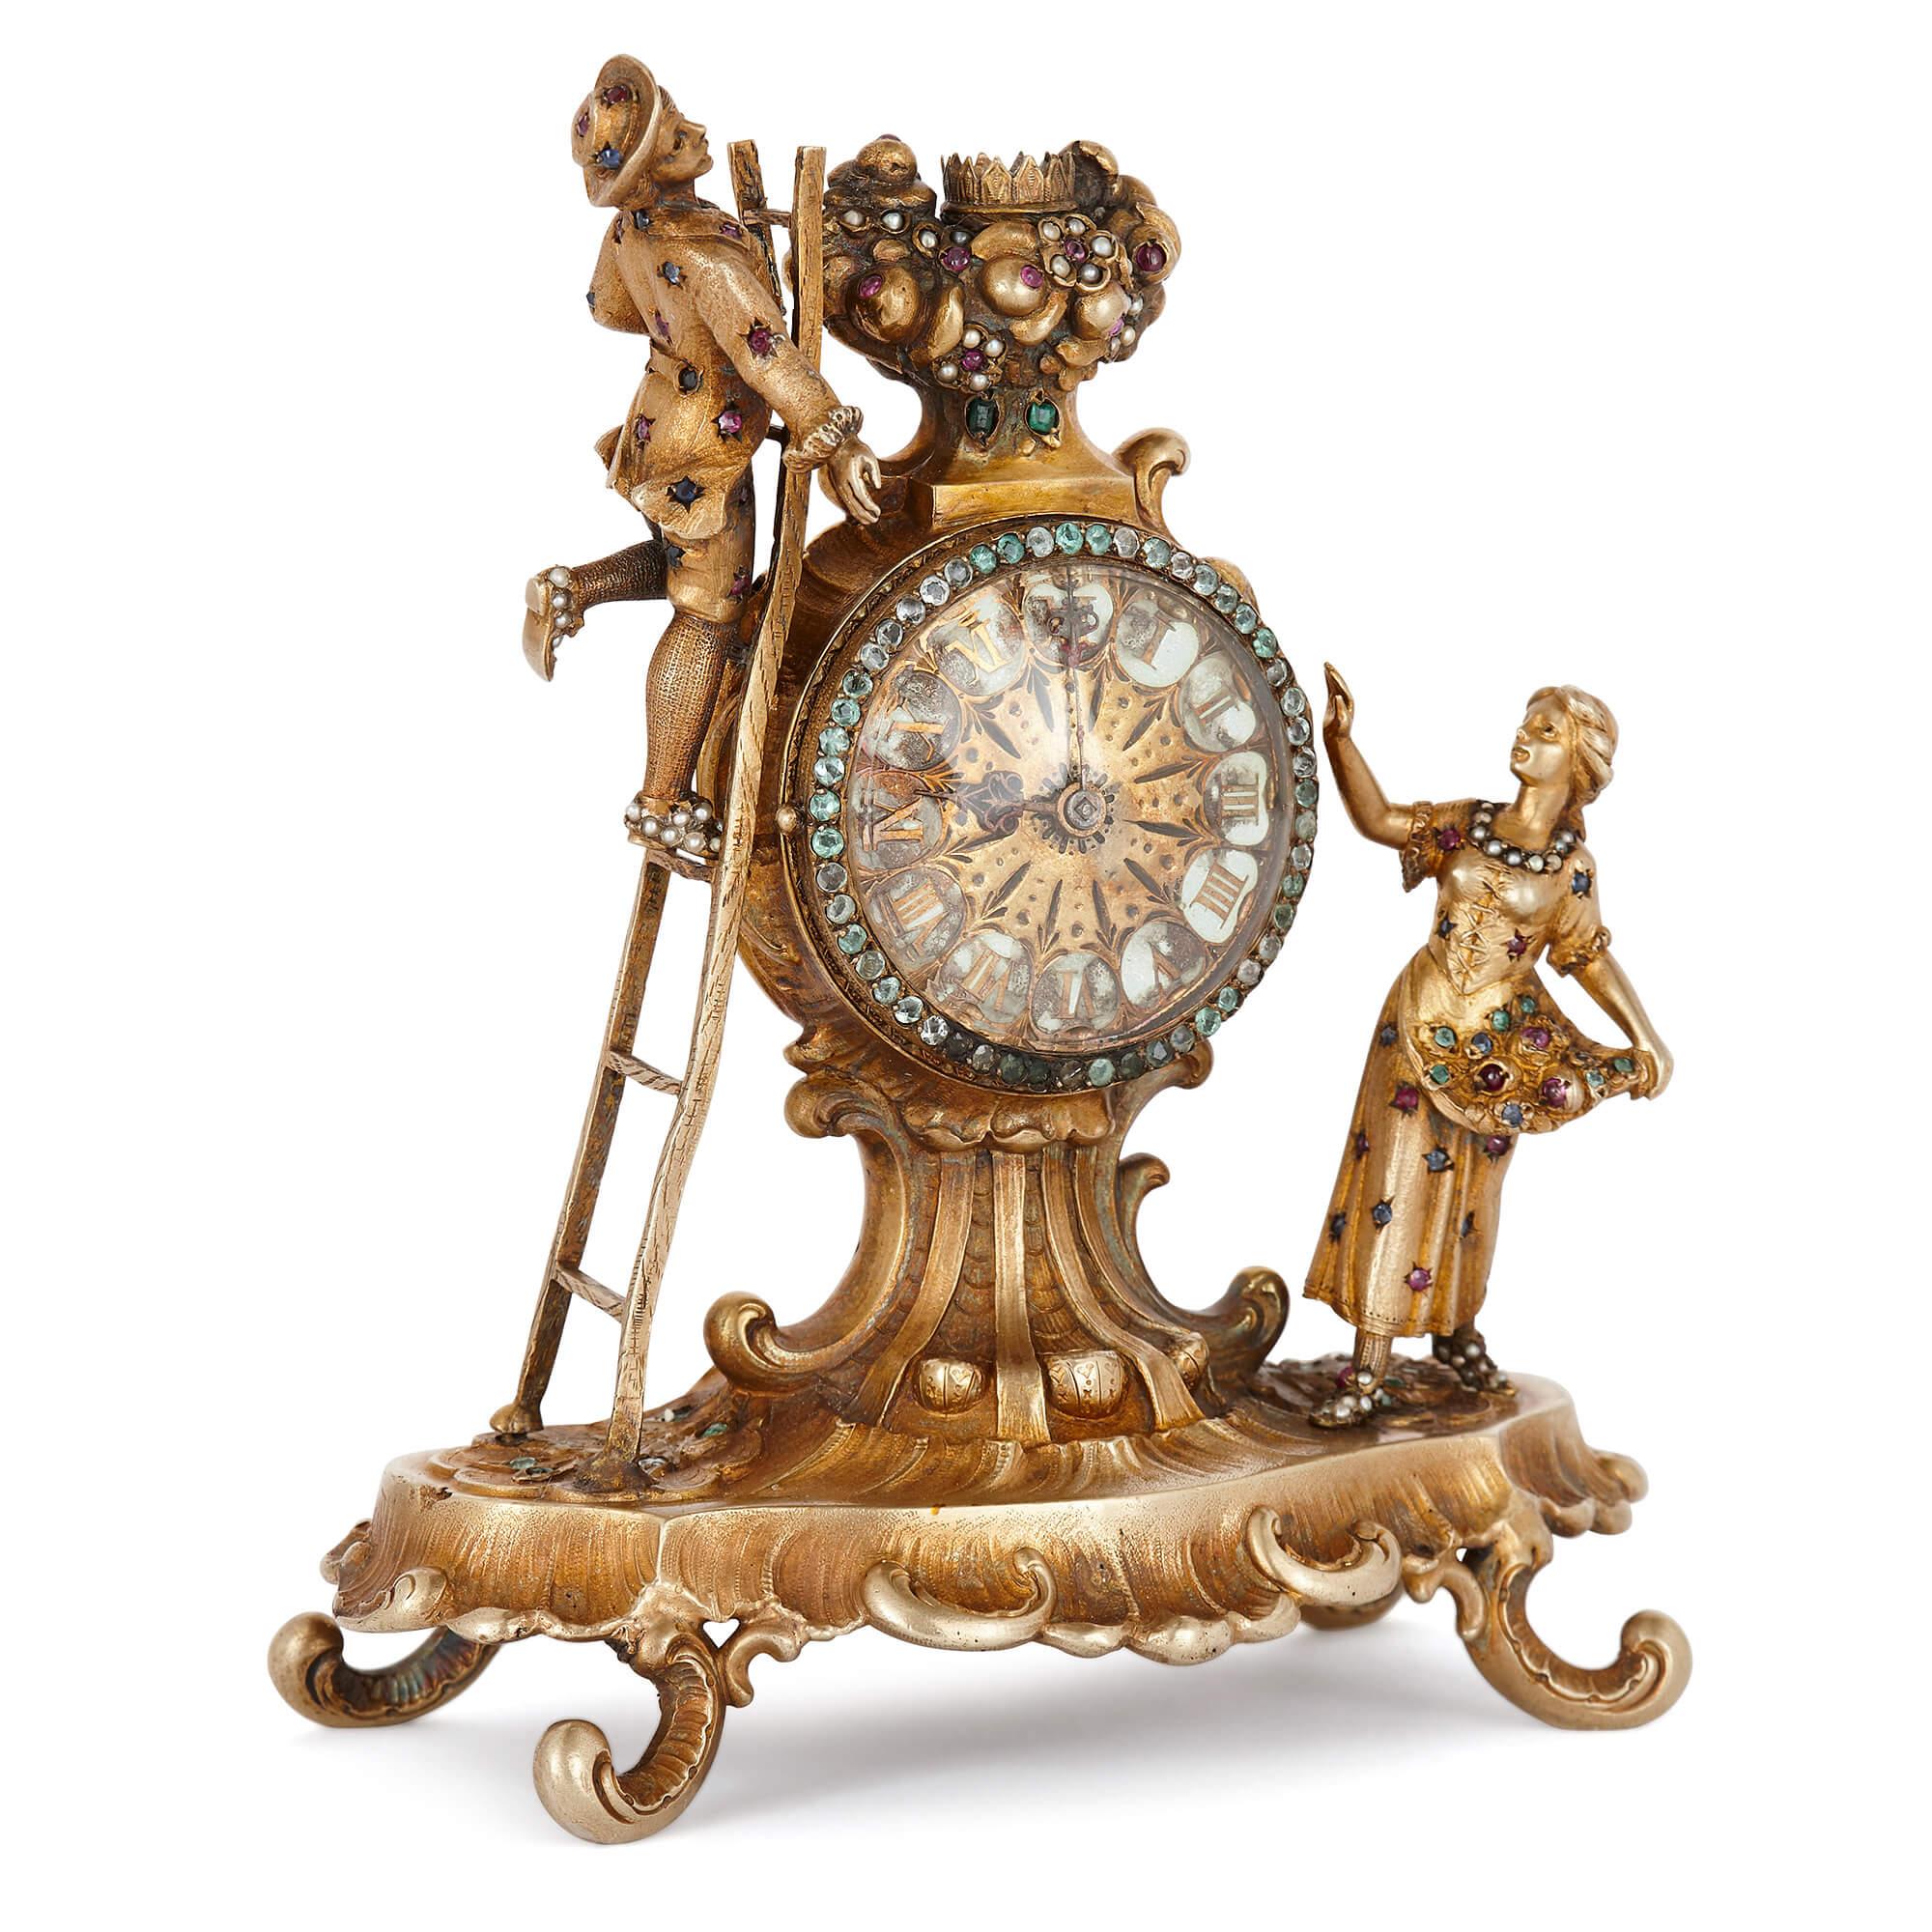 This jewel-encrusted, silver-gilt antique table clock is an exquisite piece of Viennese craftsmanship. It comprises of a scalloped base, which is raised up on four C-scroll feet, and topped by a crowned circular enameled dial. Flanking the dial are